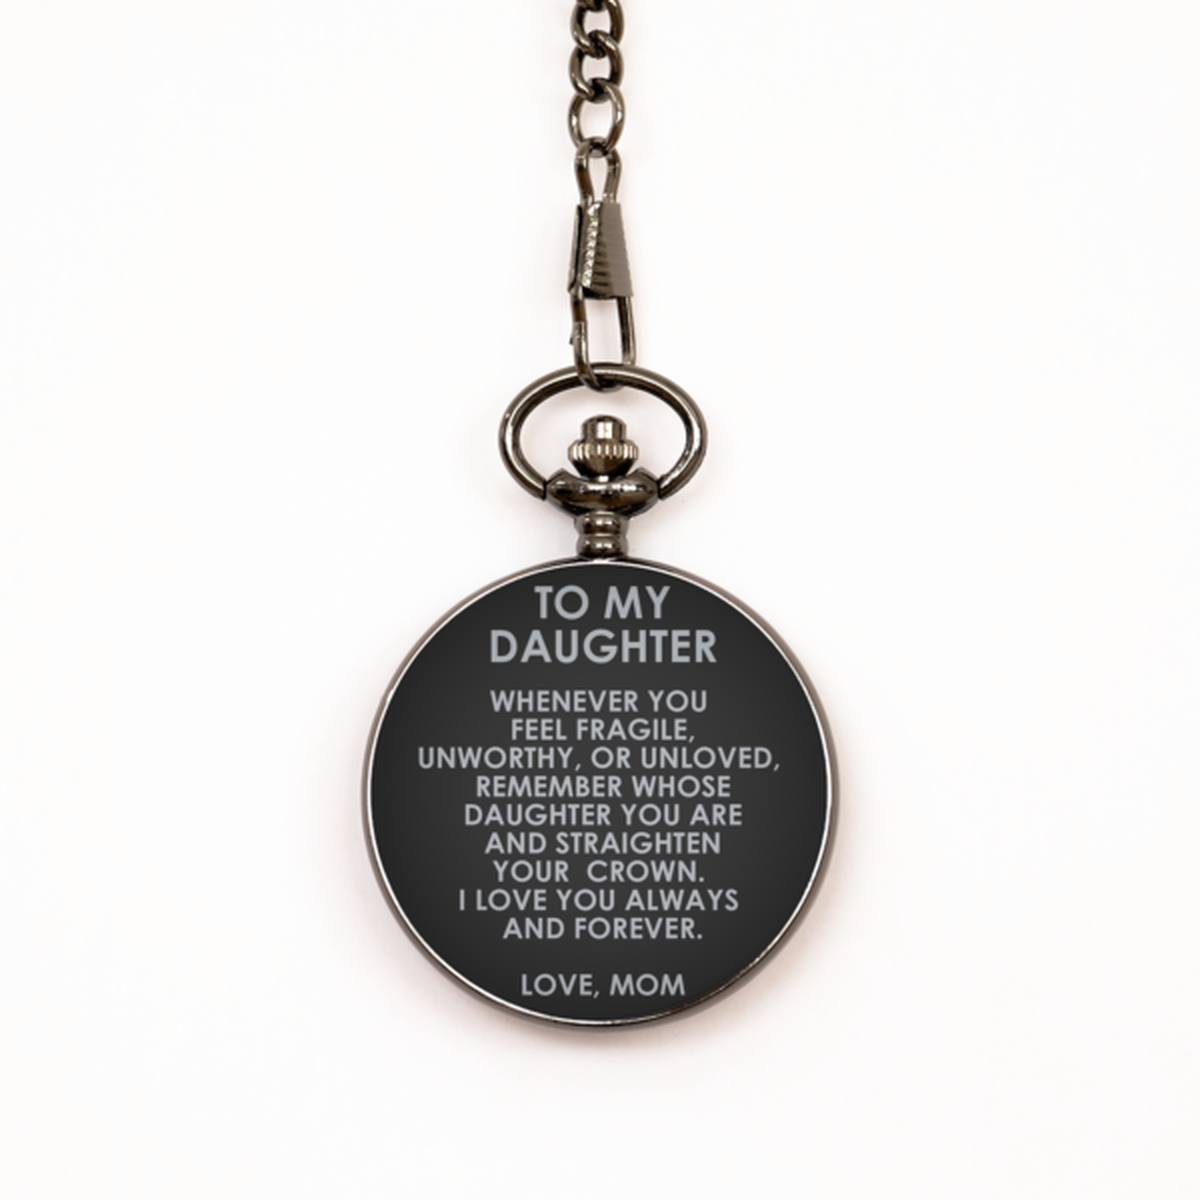 To My Daughter Black Pocket Watch, I Love You Always And Forever, Birthday Gifts For Daughter From Mom, Christmas Gifts For Women